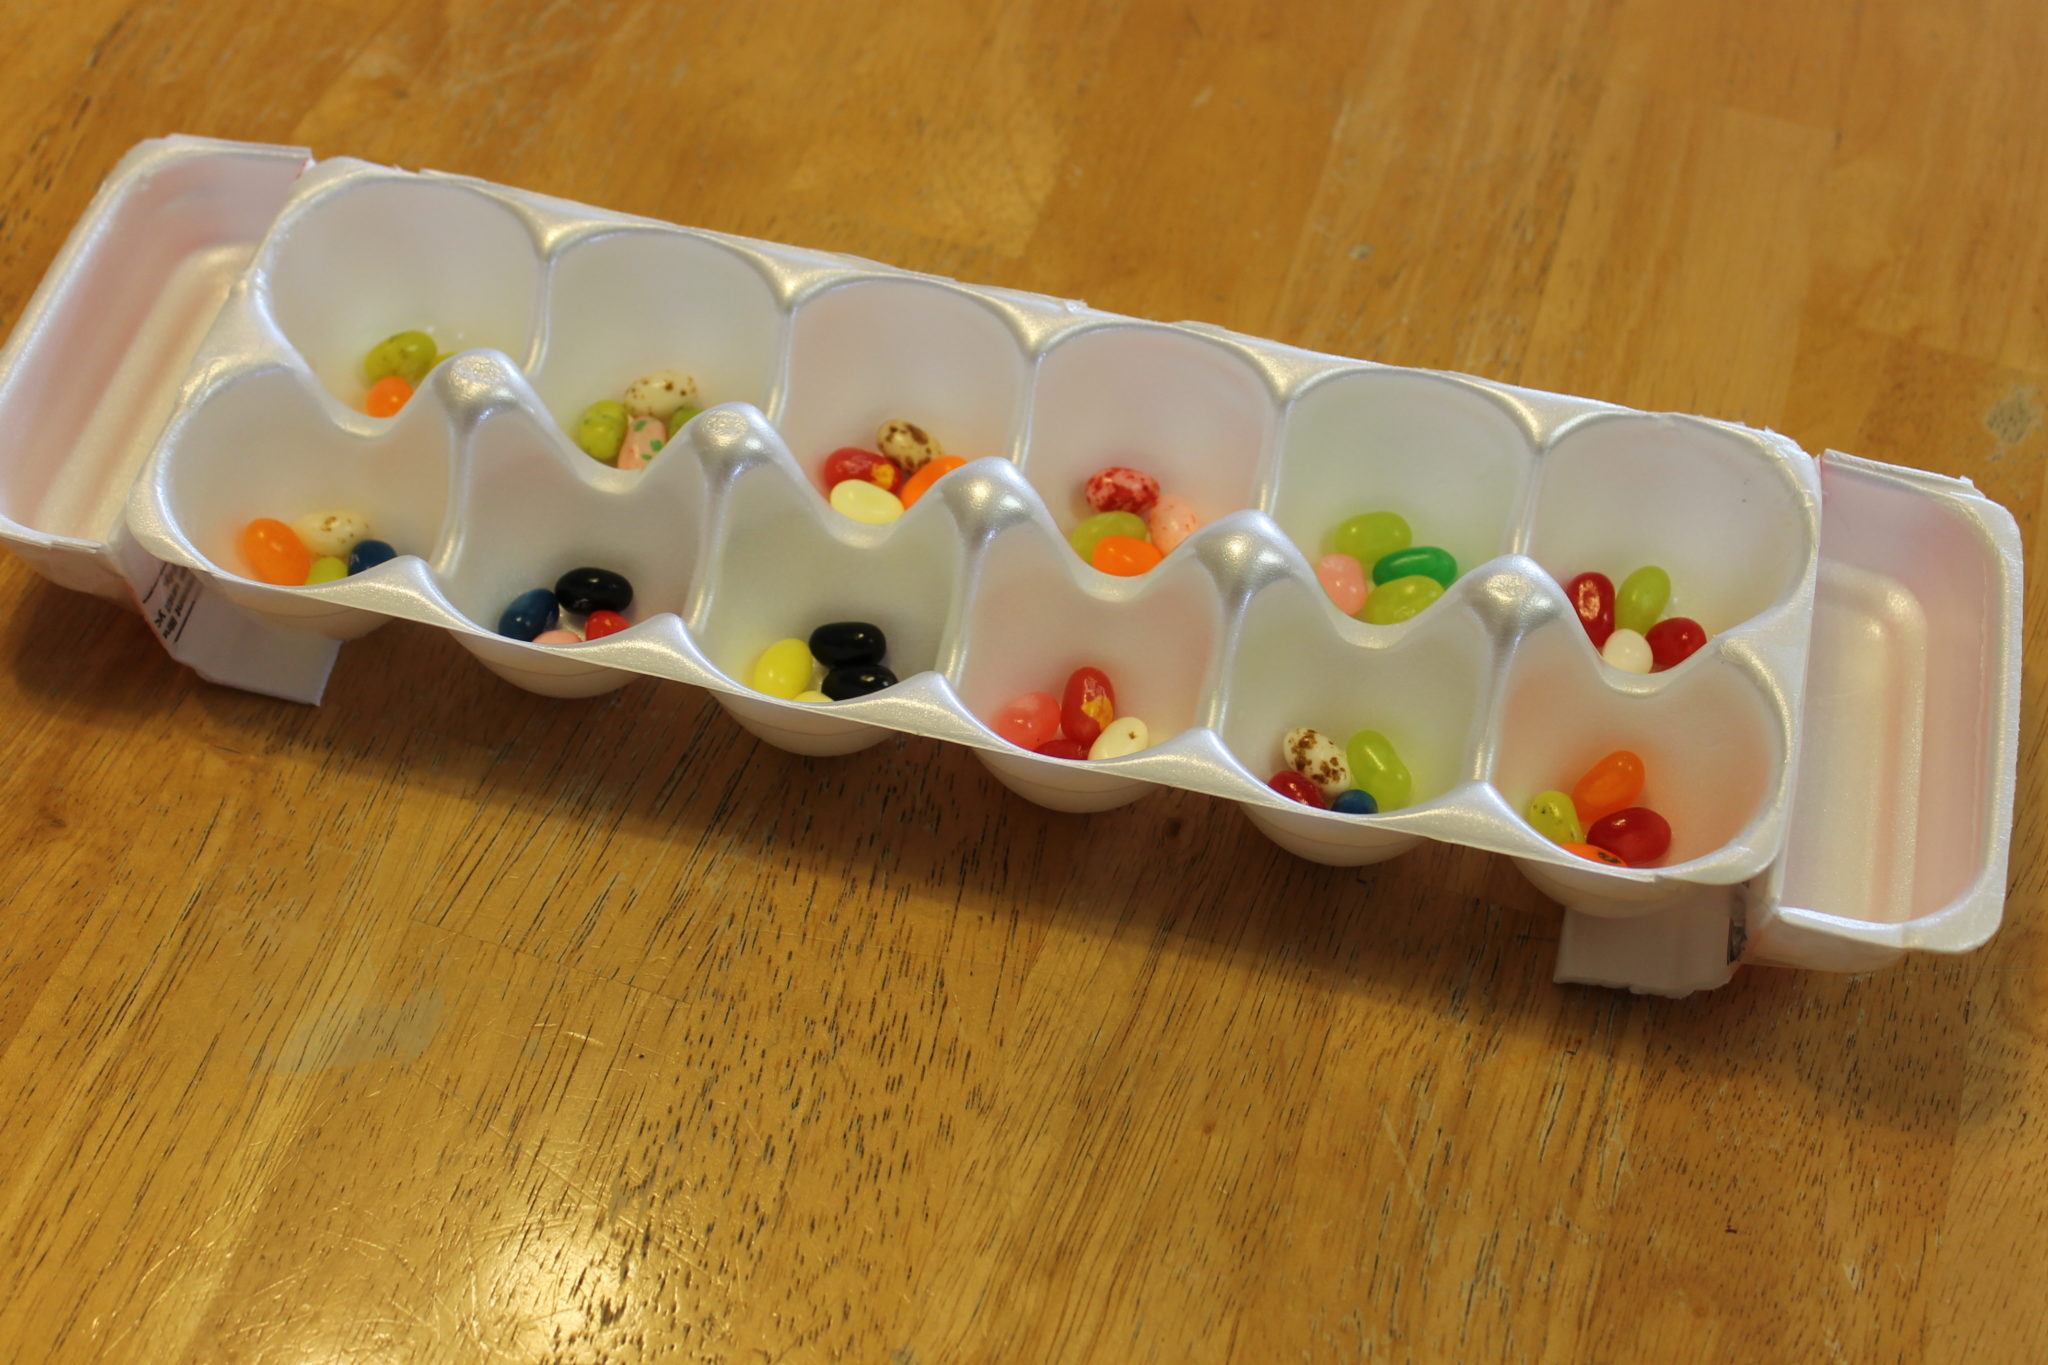 Make Your Own Egg Carton Mancala Game Upcycled Craft For Kids,Red Eared Turtle Food